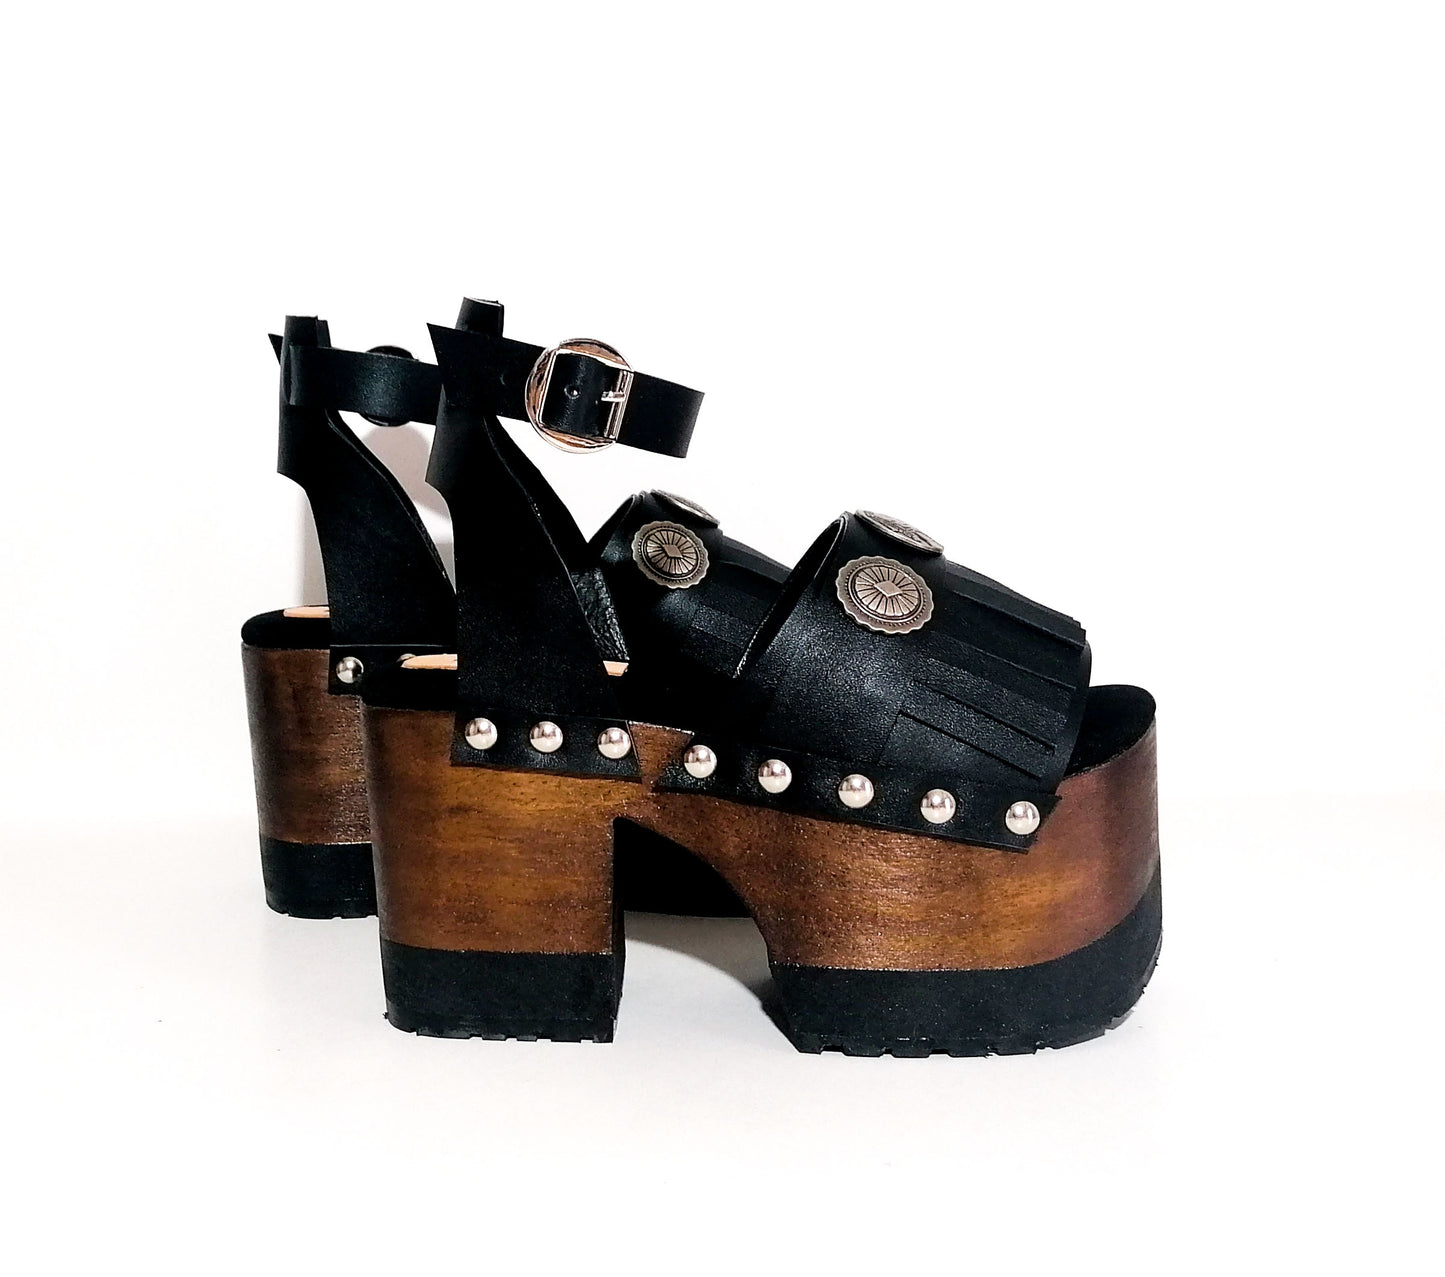 Clogs platform sae 90s. Super high wooden heels vintage style. Black leather clog with superndals vintage styl high wooden heel. Decorated with American Indian. High quality handmade leather shoes. Sizes 34 to 47.